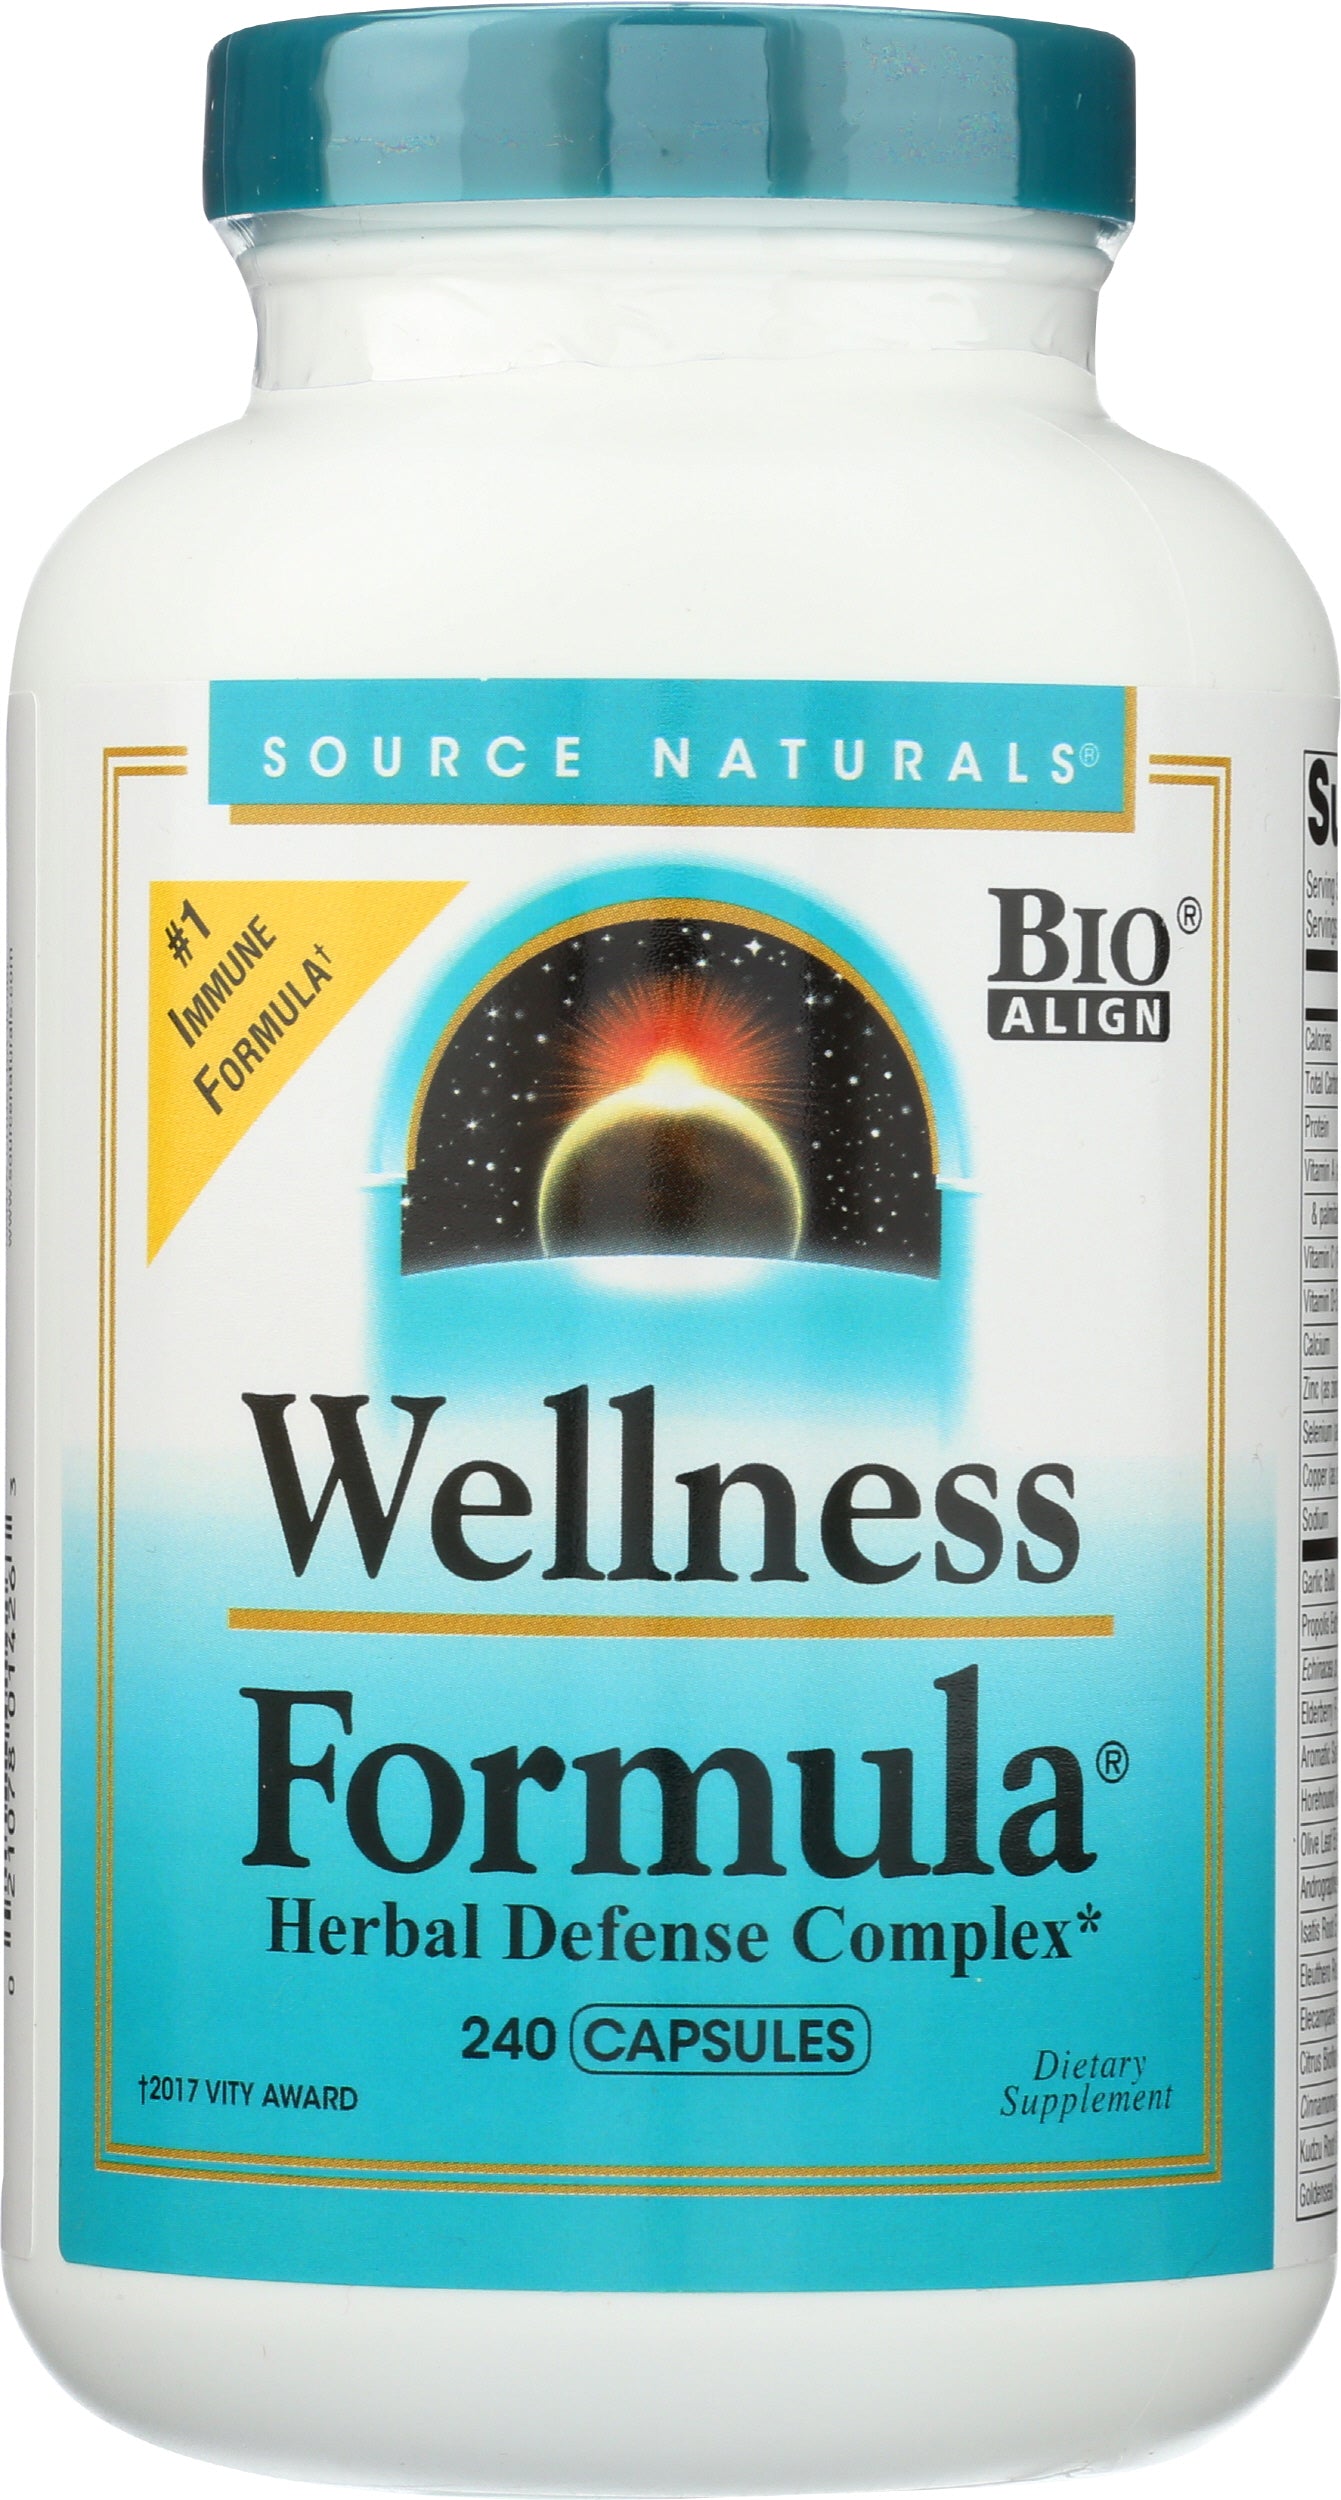 Source Naturals Wellness Formula 240 Capsules Front of Bottle